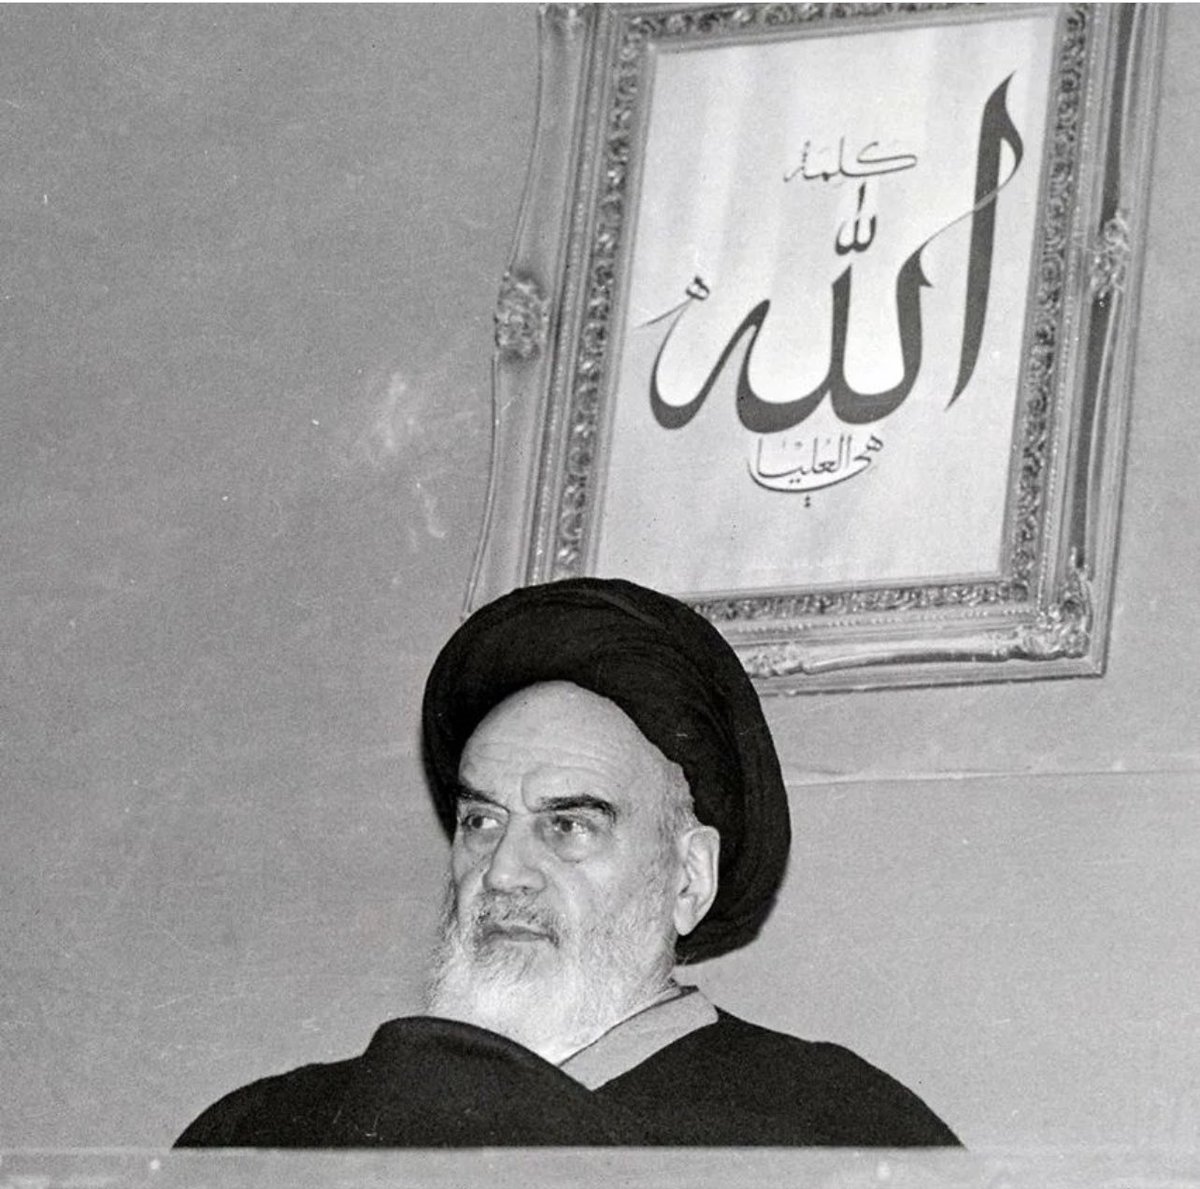 This Revolution removed an anti-Islamic government from the picture, and it established and built an Islamic government in its place #TheGreatKhomeini